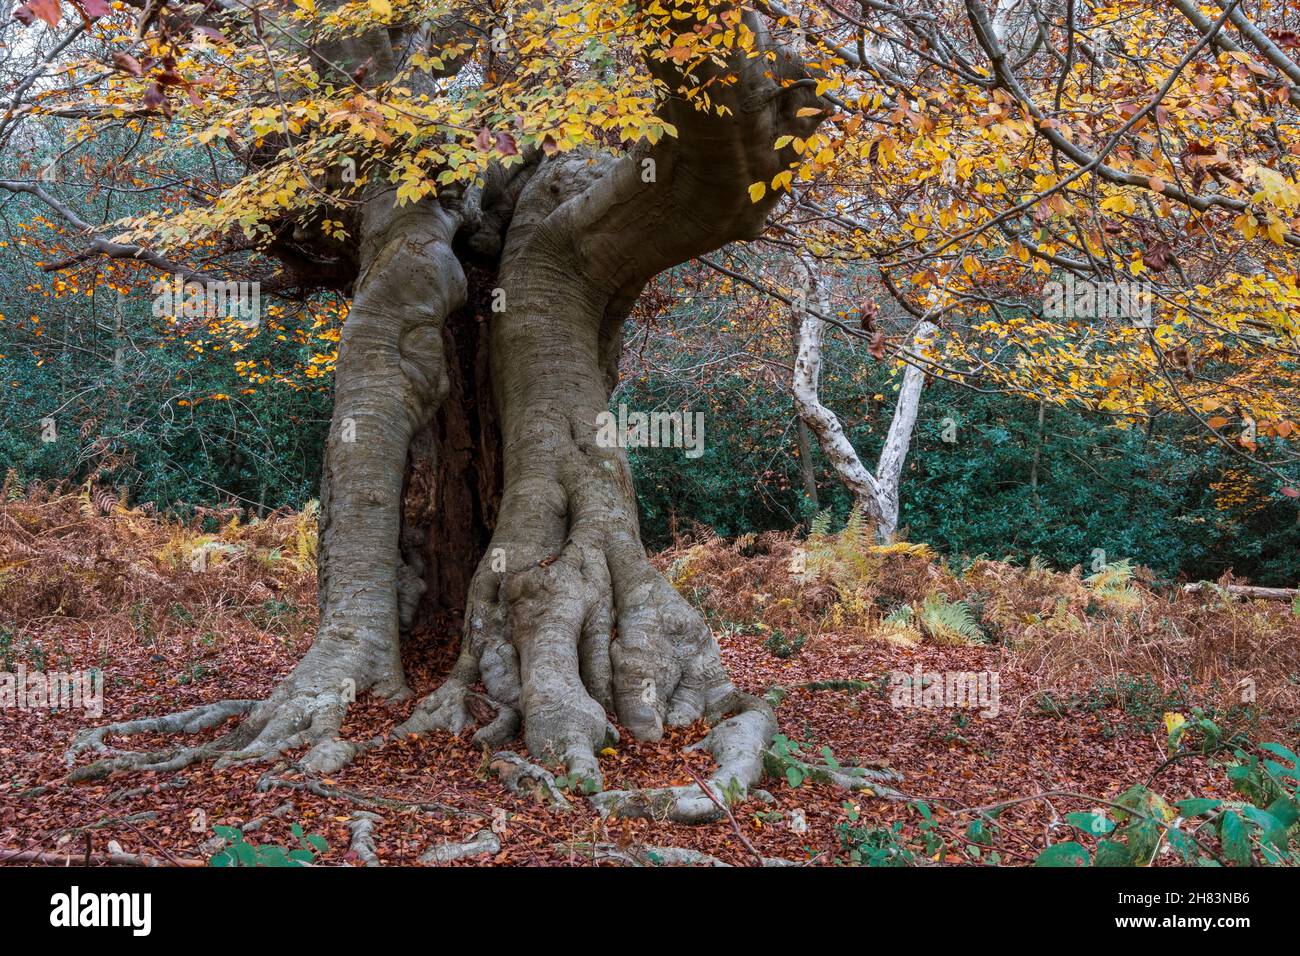 A very ancient beech tree still alive and bearing autumn leaves which will blow down in the wind. Stock Photo